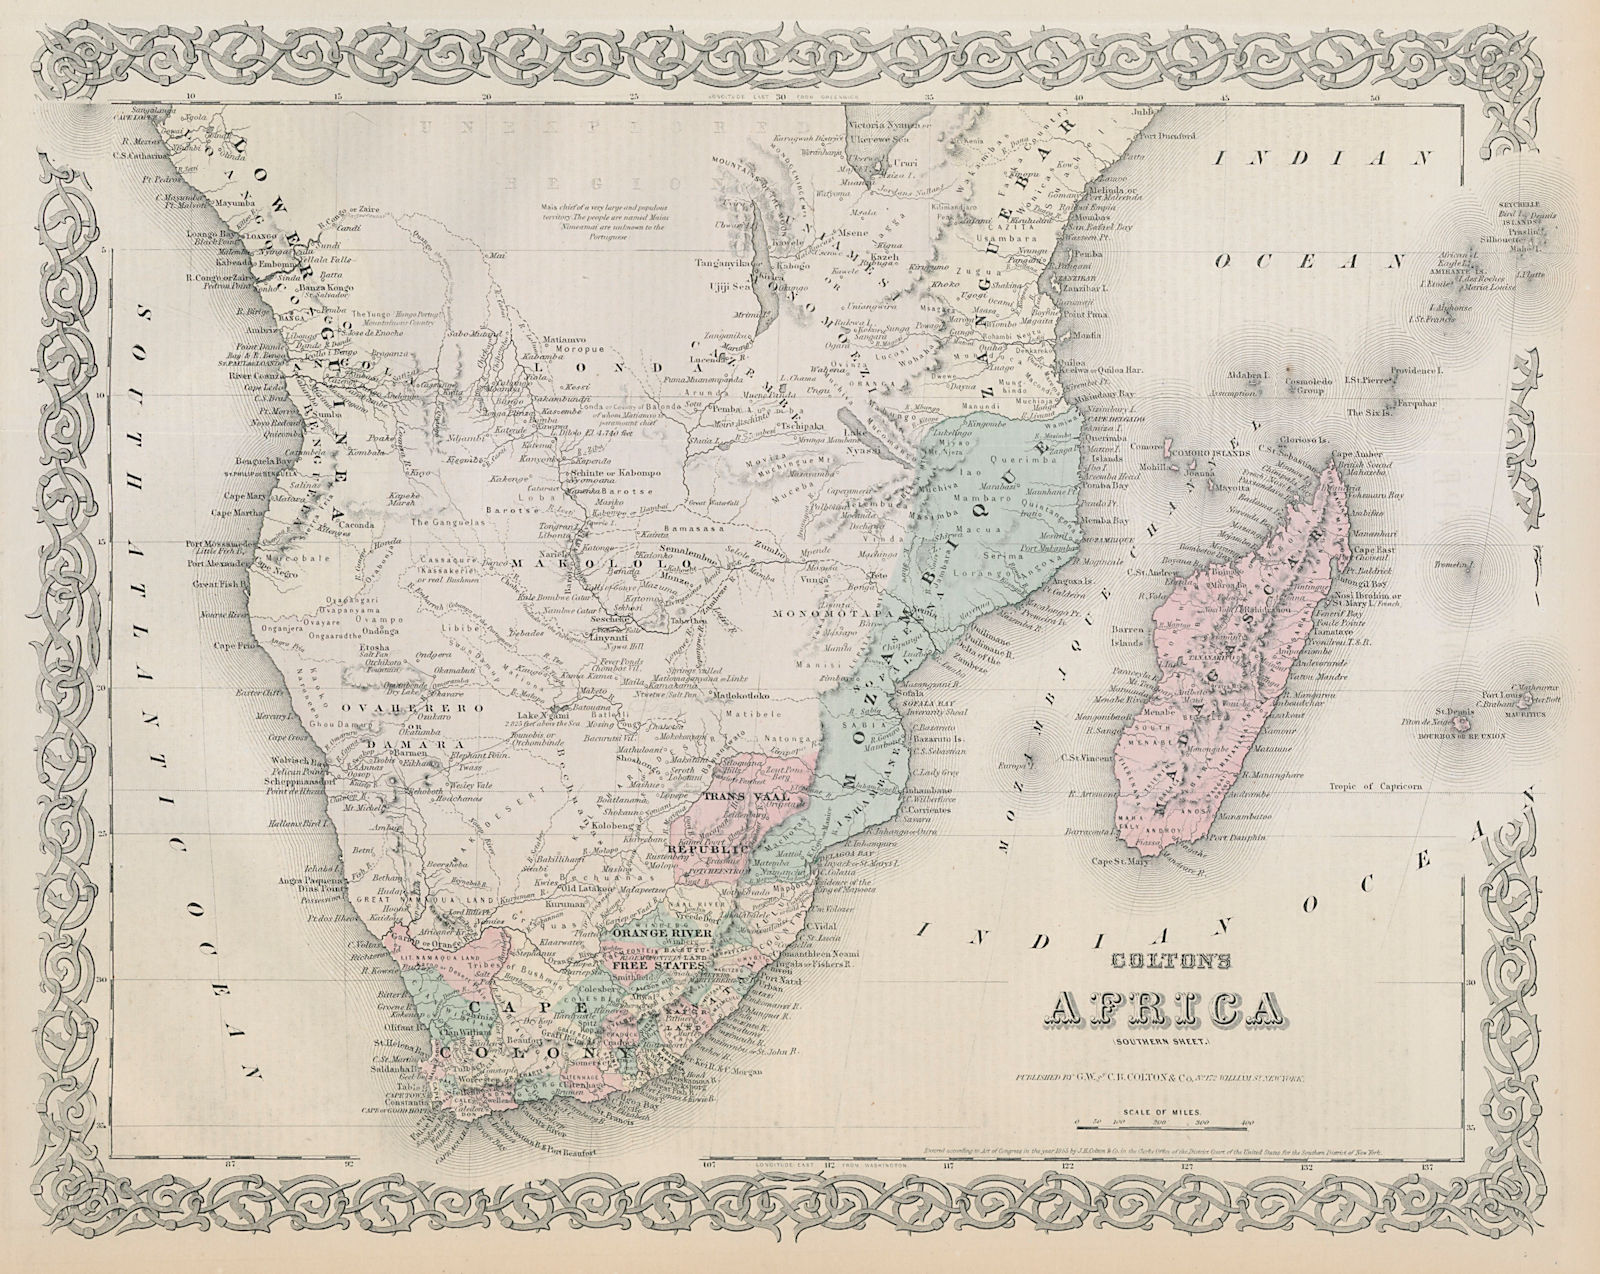 Southern Africa. Cape Colony. Mountains of the Moon. COLTON 1869 old map